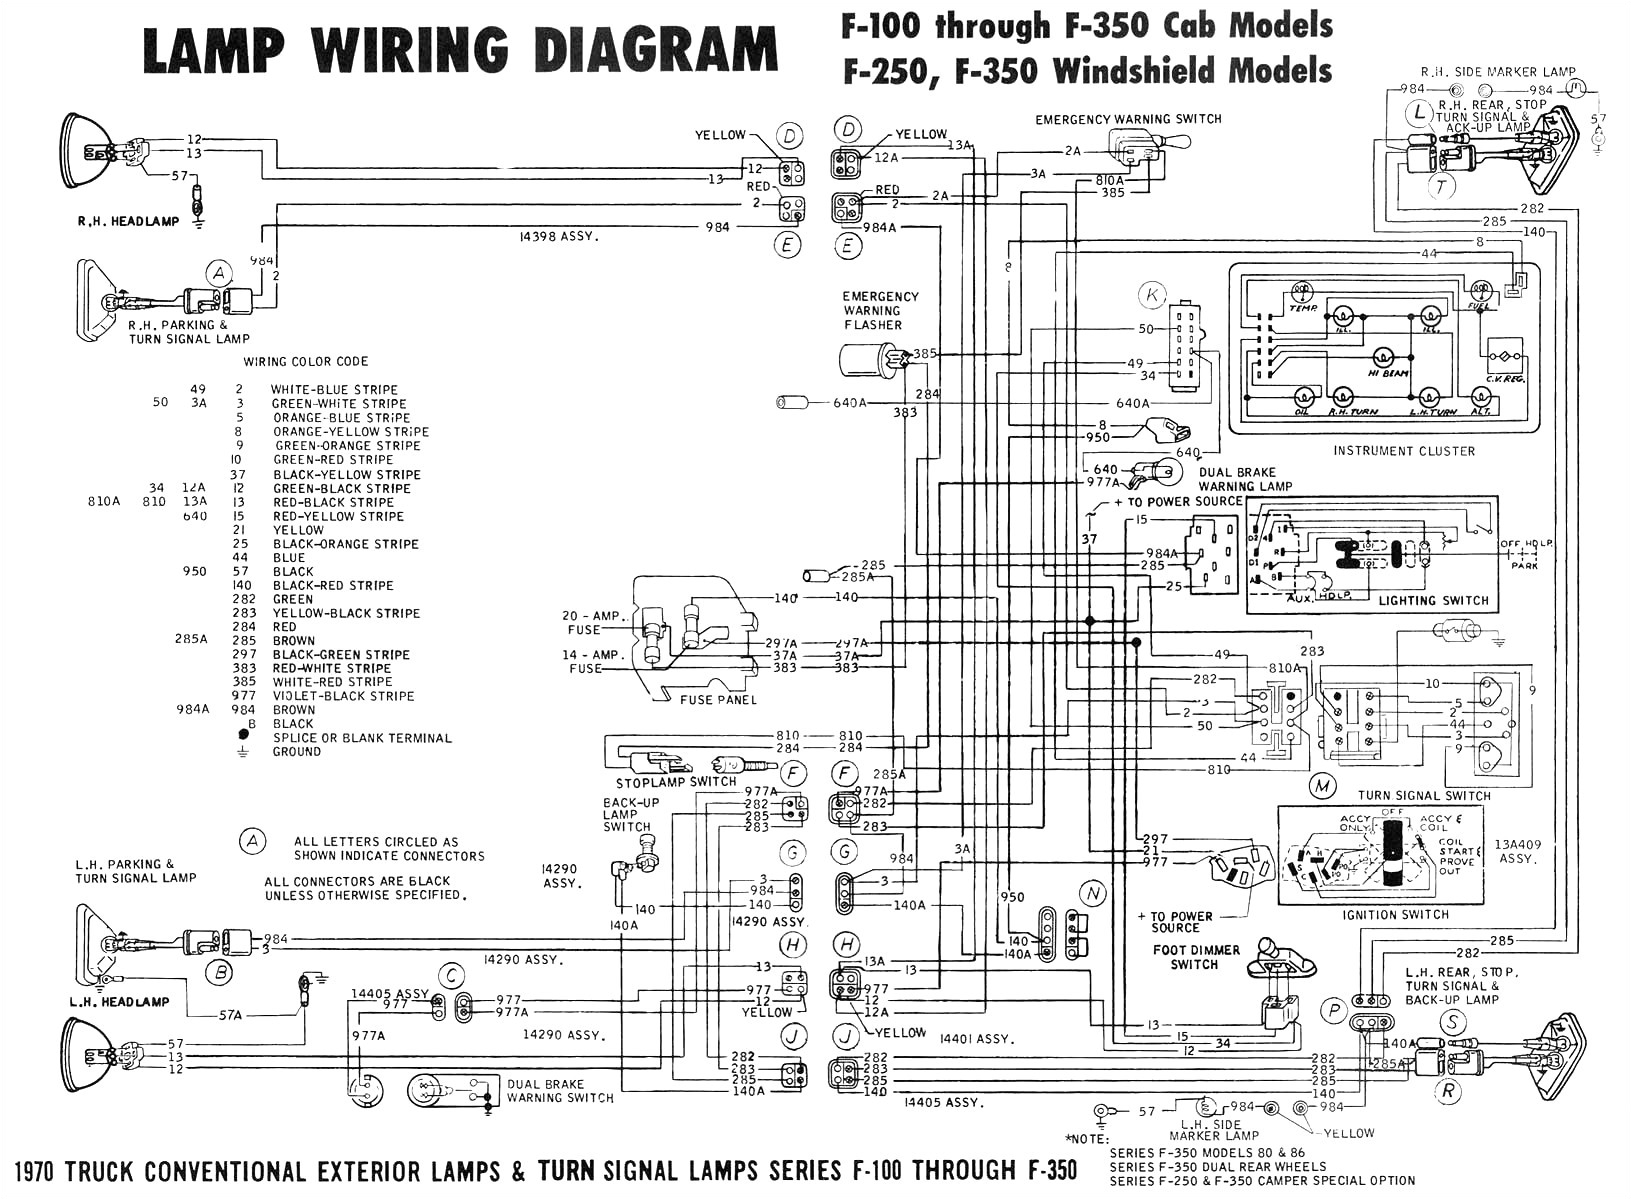 f350 wiring harness wiring diagram name 1995 f350 4x4 wiring harness